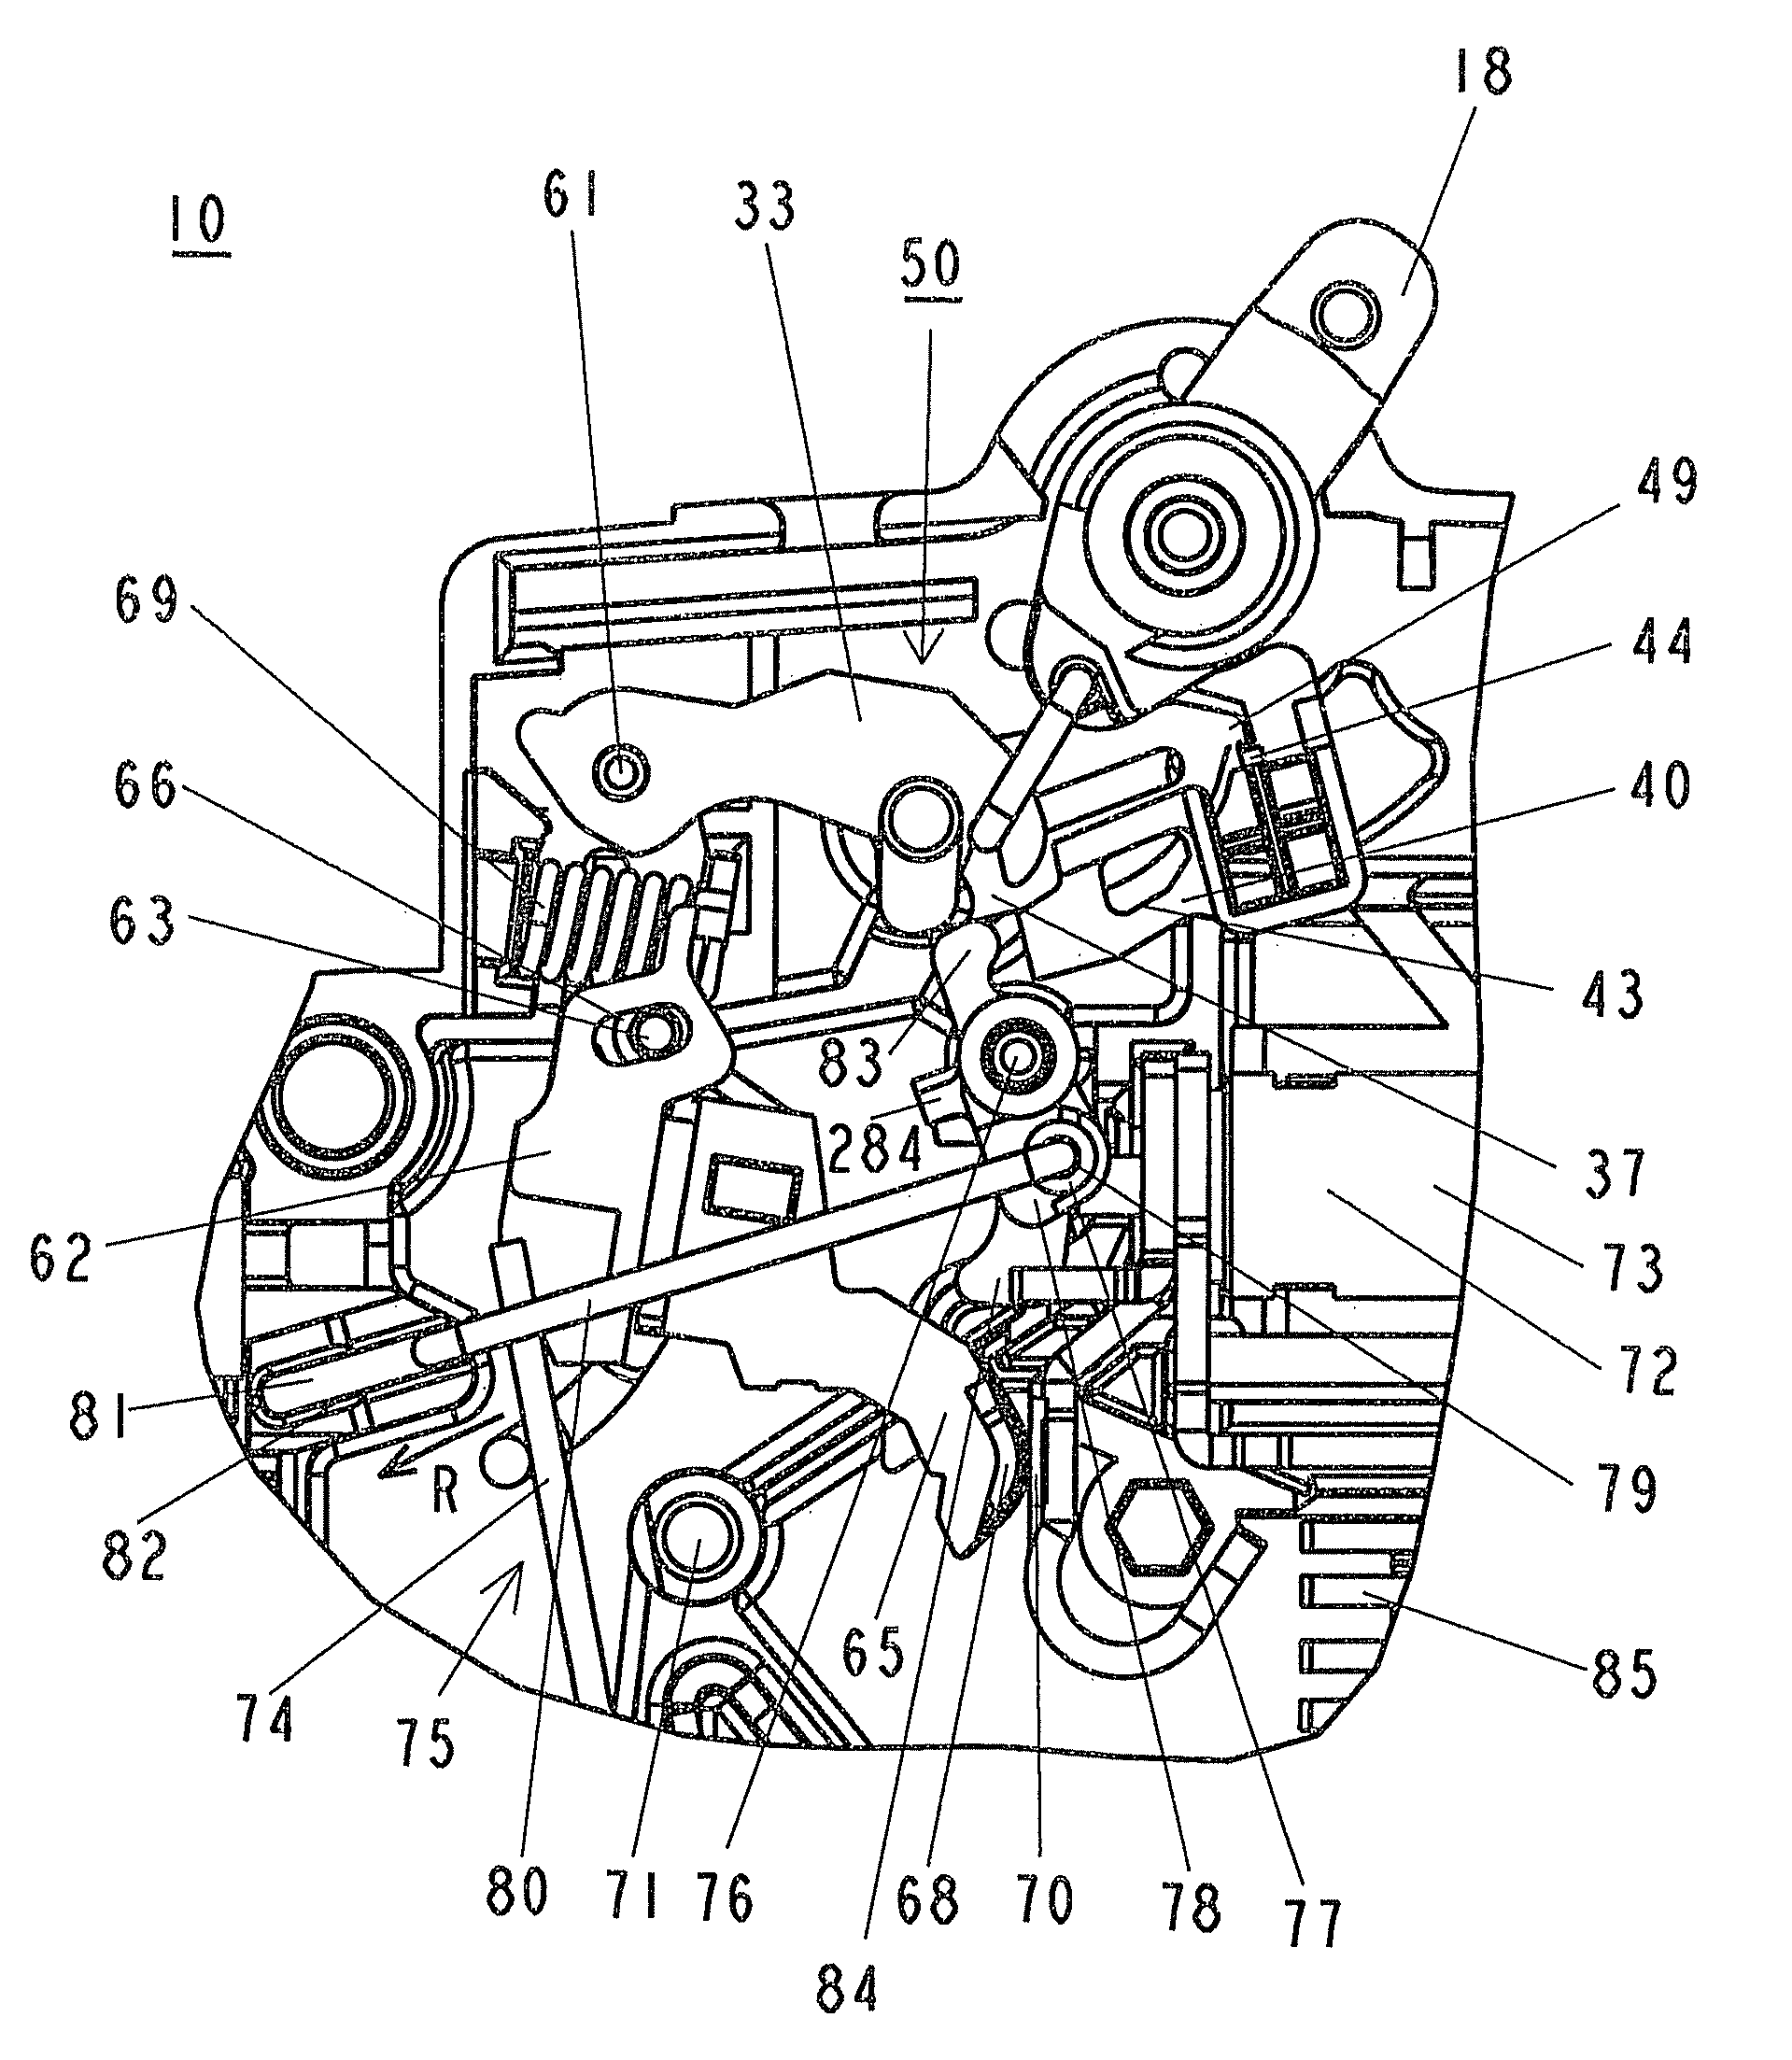 Electrical service switching device